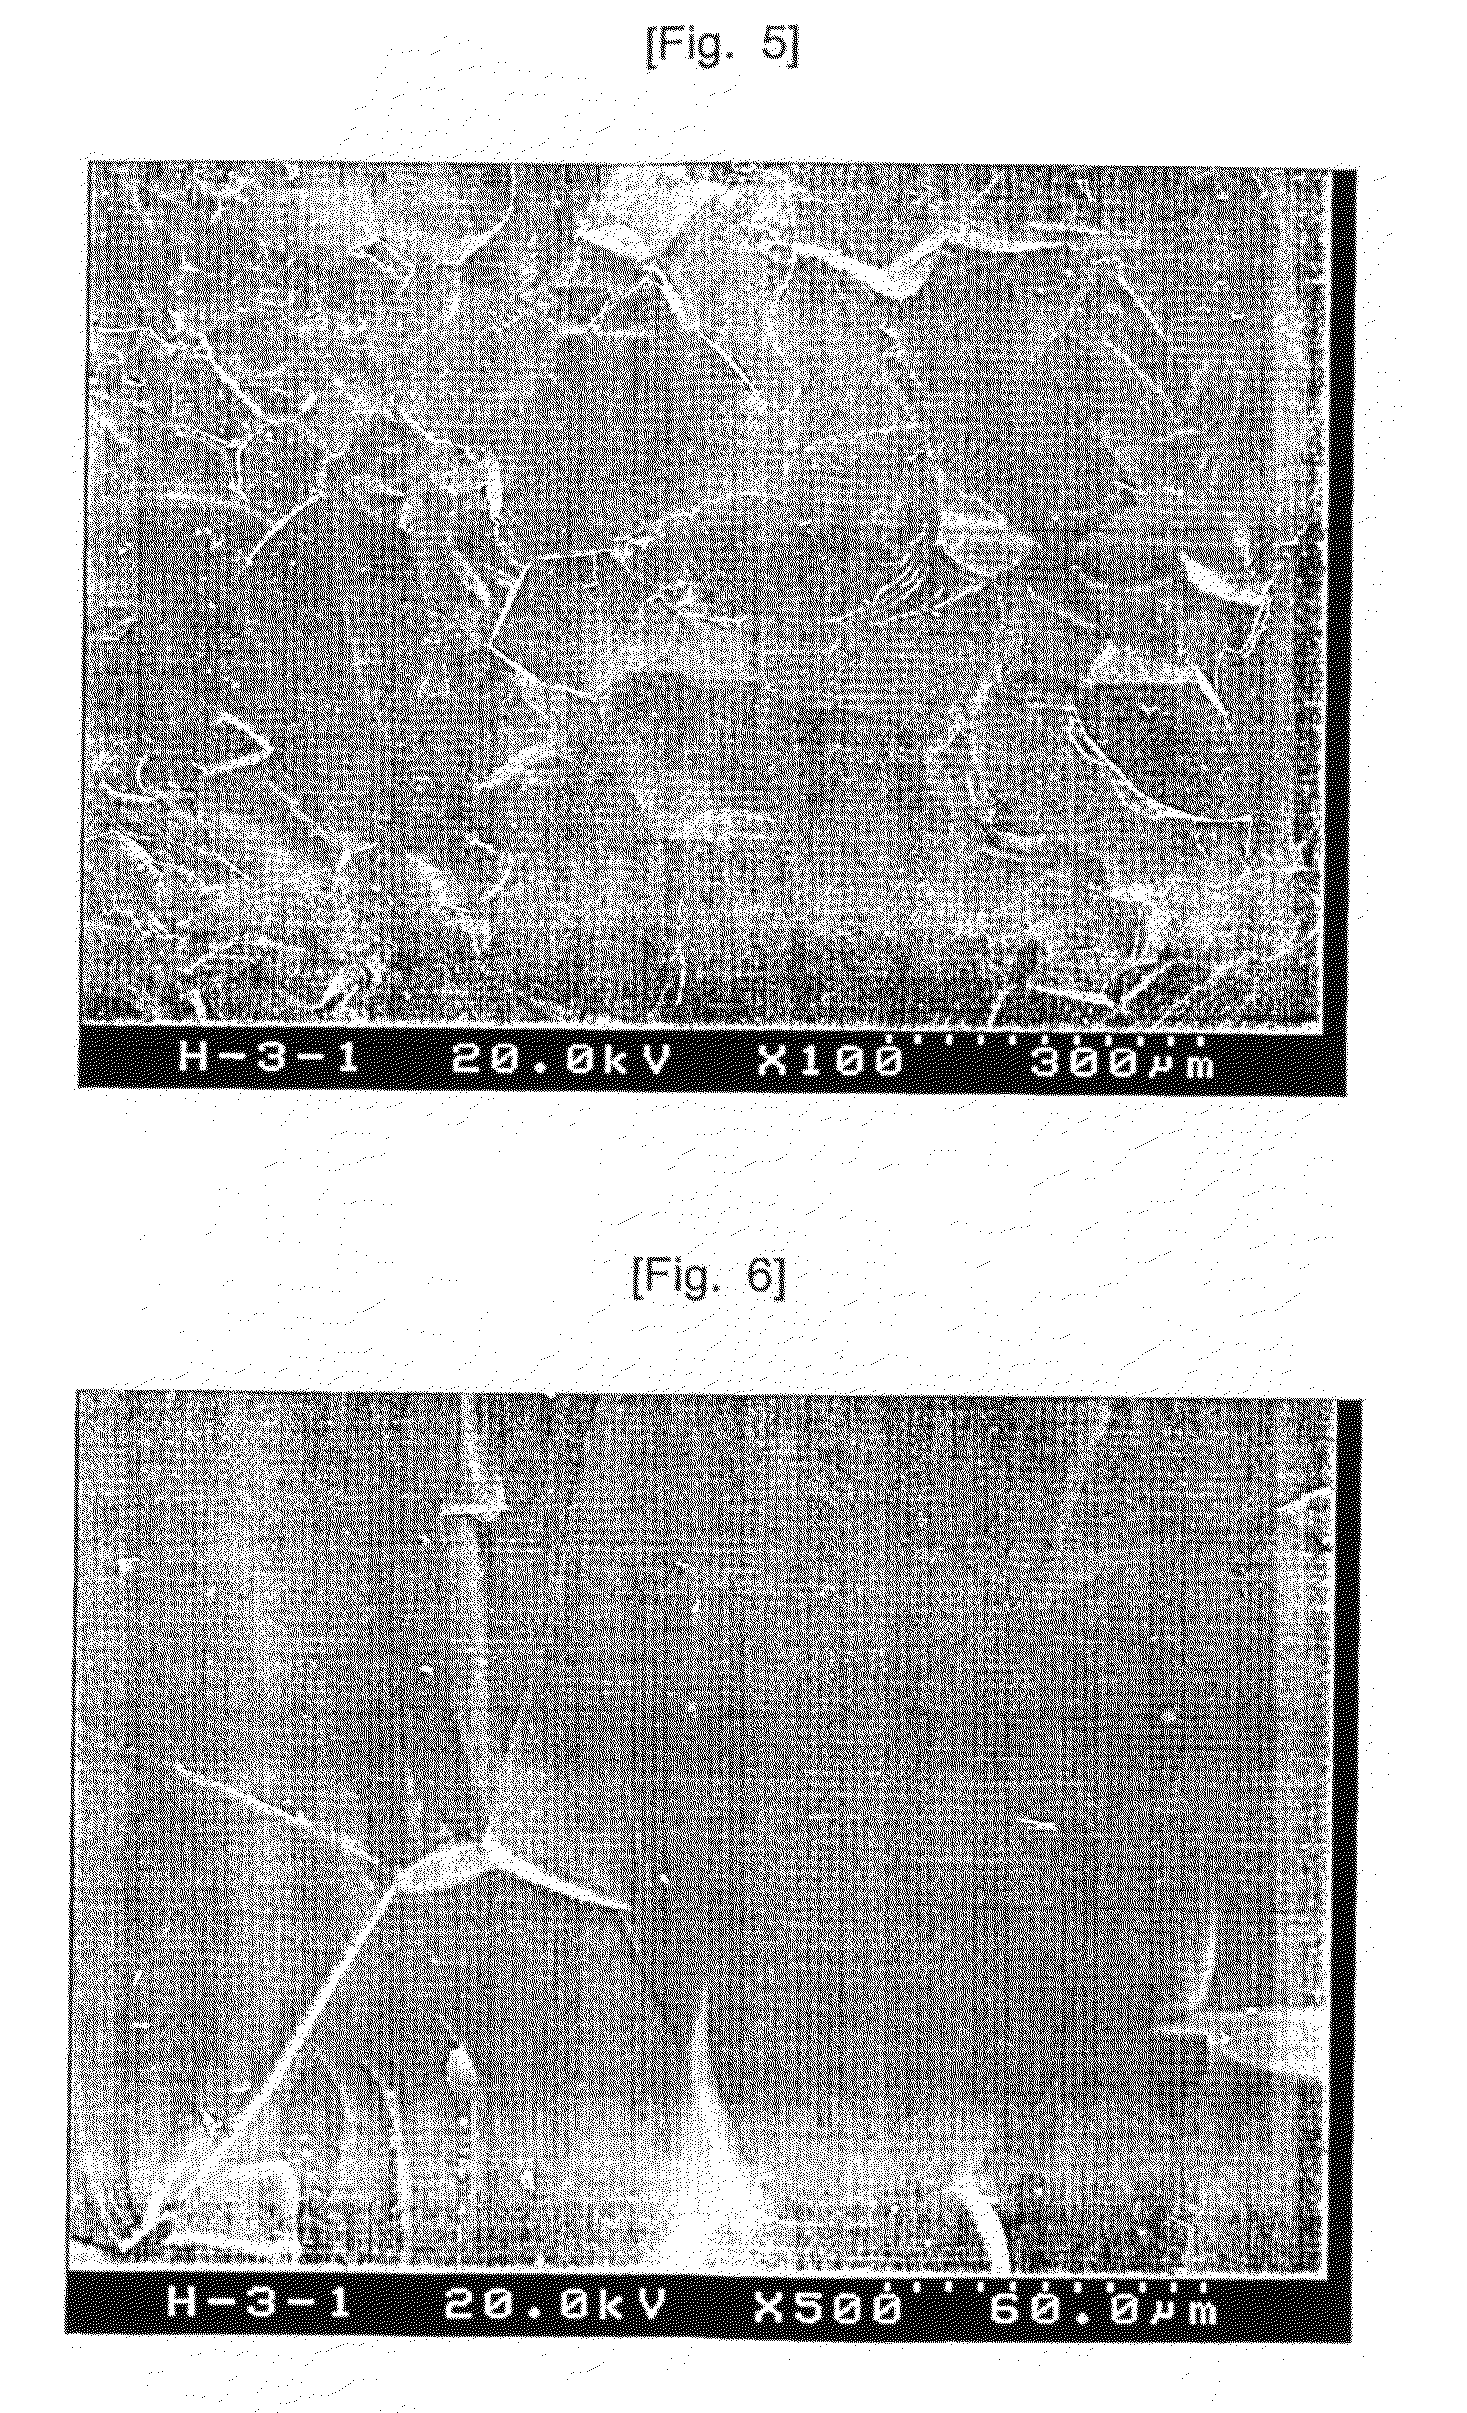 Method for manufacturing transparent polycrystalline aluminum oxynitride